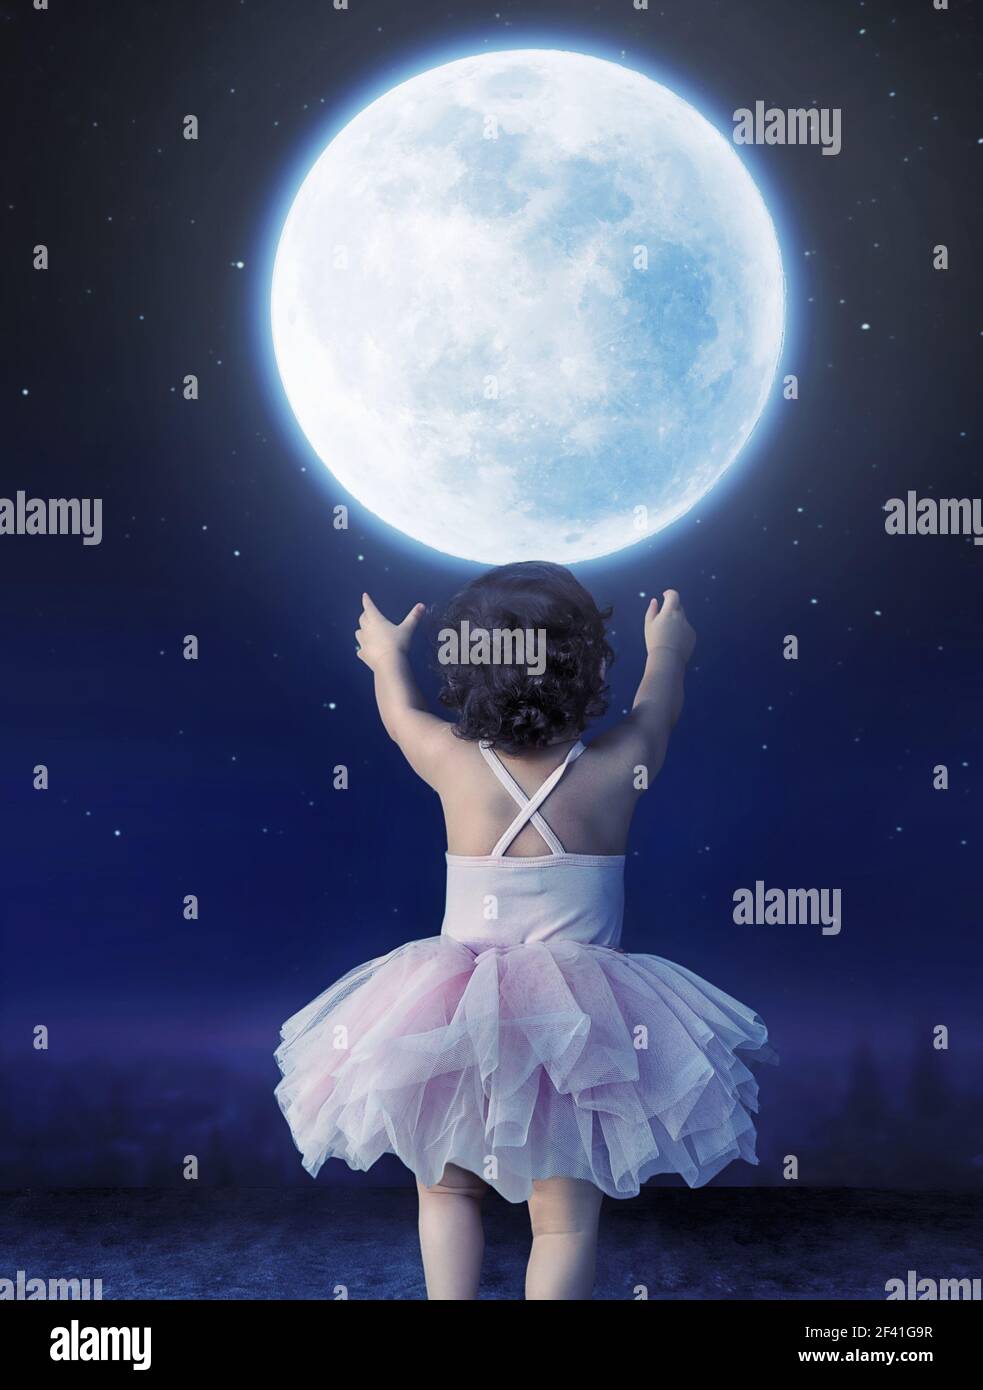 Cute baby girl reaching to the moon Stock Photo